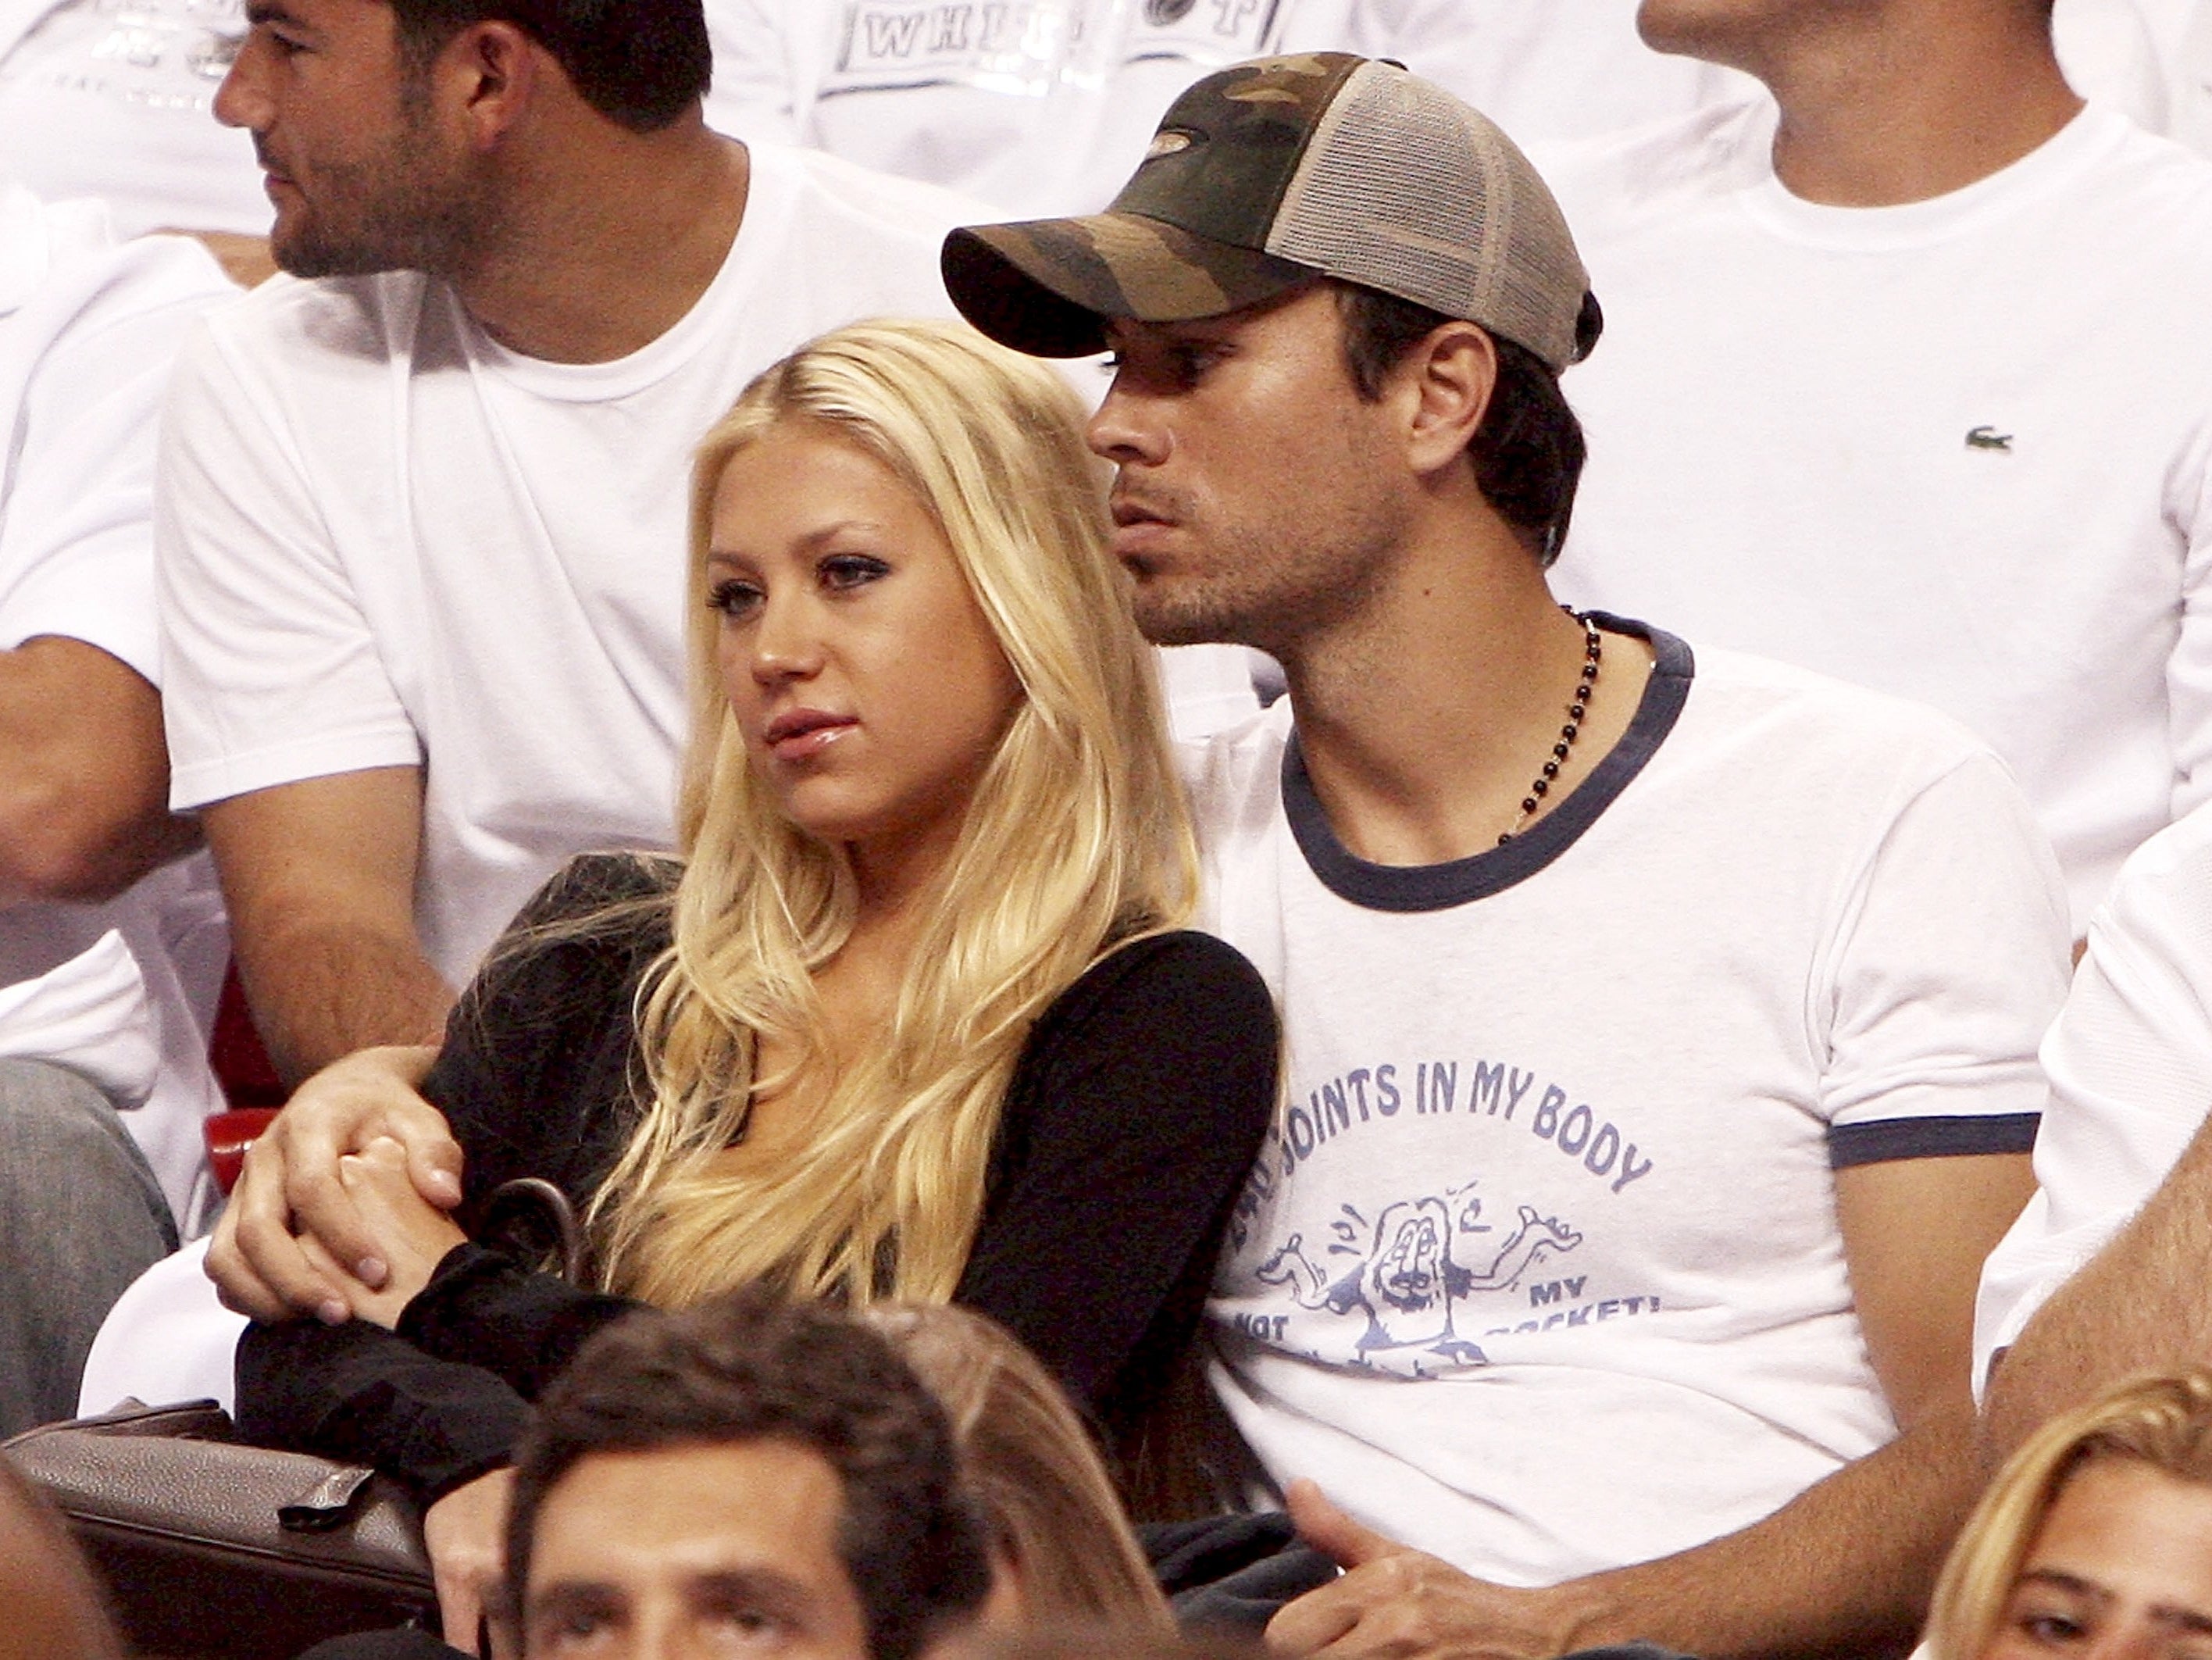 Anna Kournikova and singer Enrique Iglesias hold each other as they watch the the New Jersey Nets take on the Miami Heat in game one of the Eastern Conference semifinals at American Airlines Arena on May 8, 2006